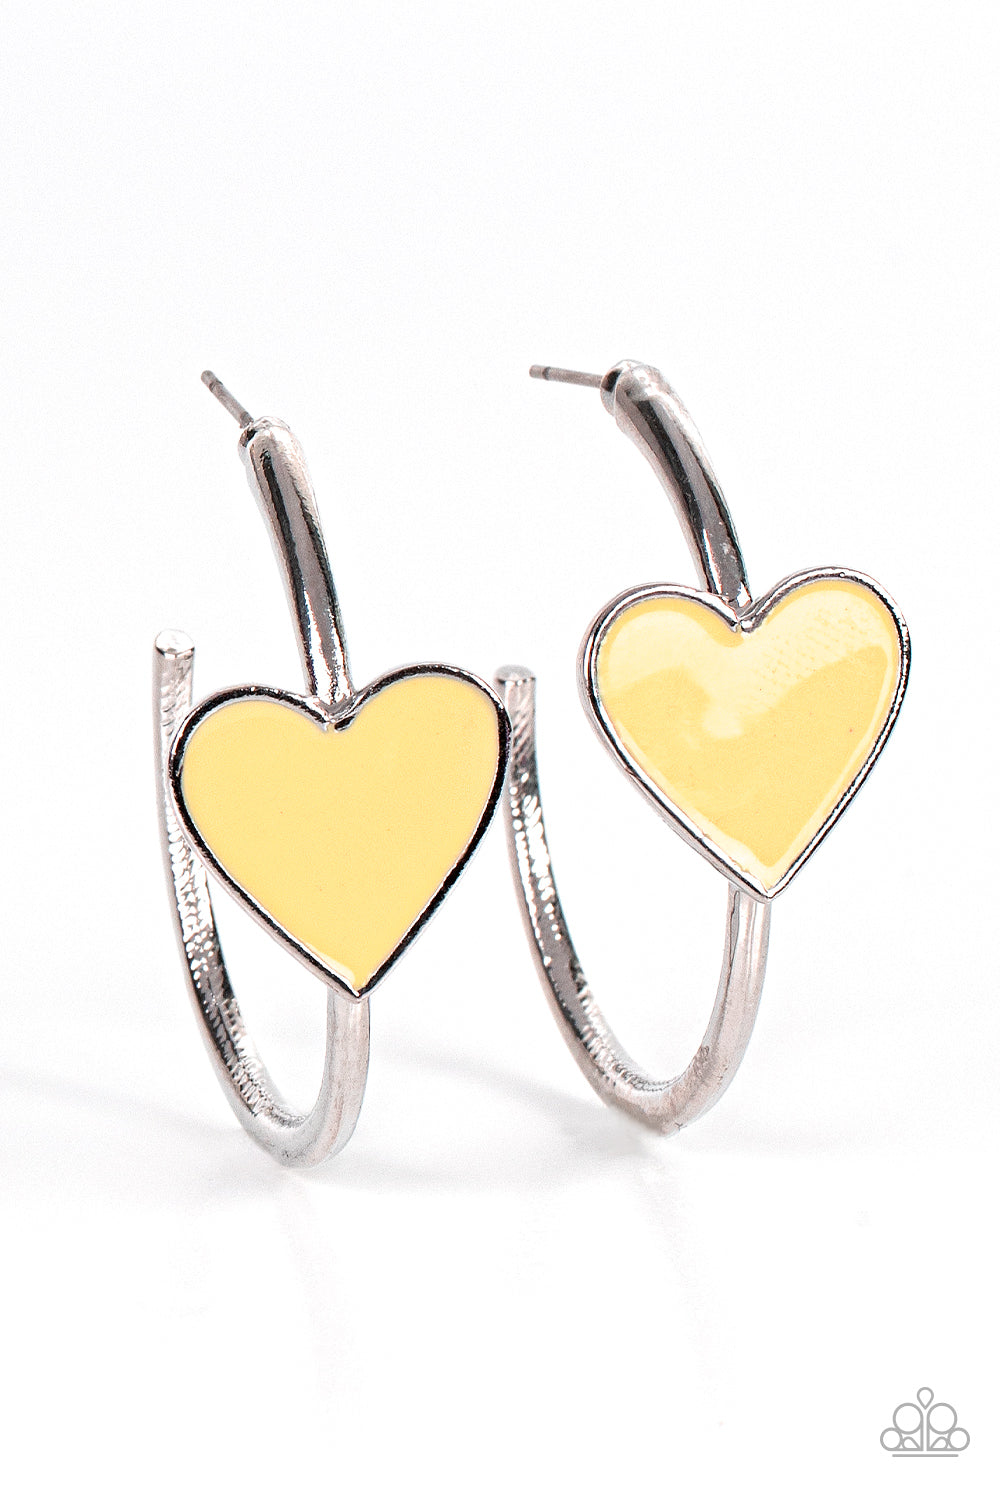 A charming Illuminating heart adorns the front of a classic silver hoop resulting in a whimsical fashion. Earring attaches to a standard post fitting. Hoop measures approximately 1 1/4" in diameter.